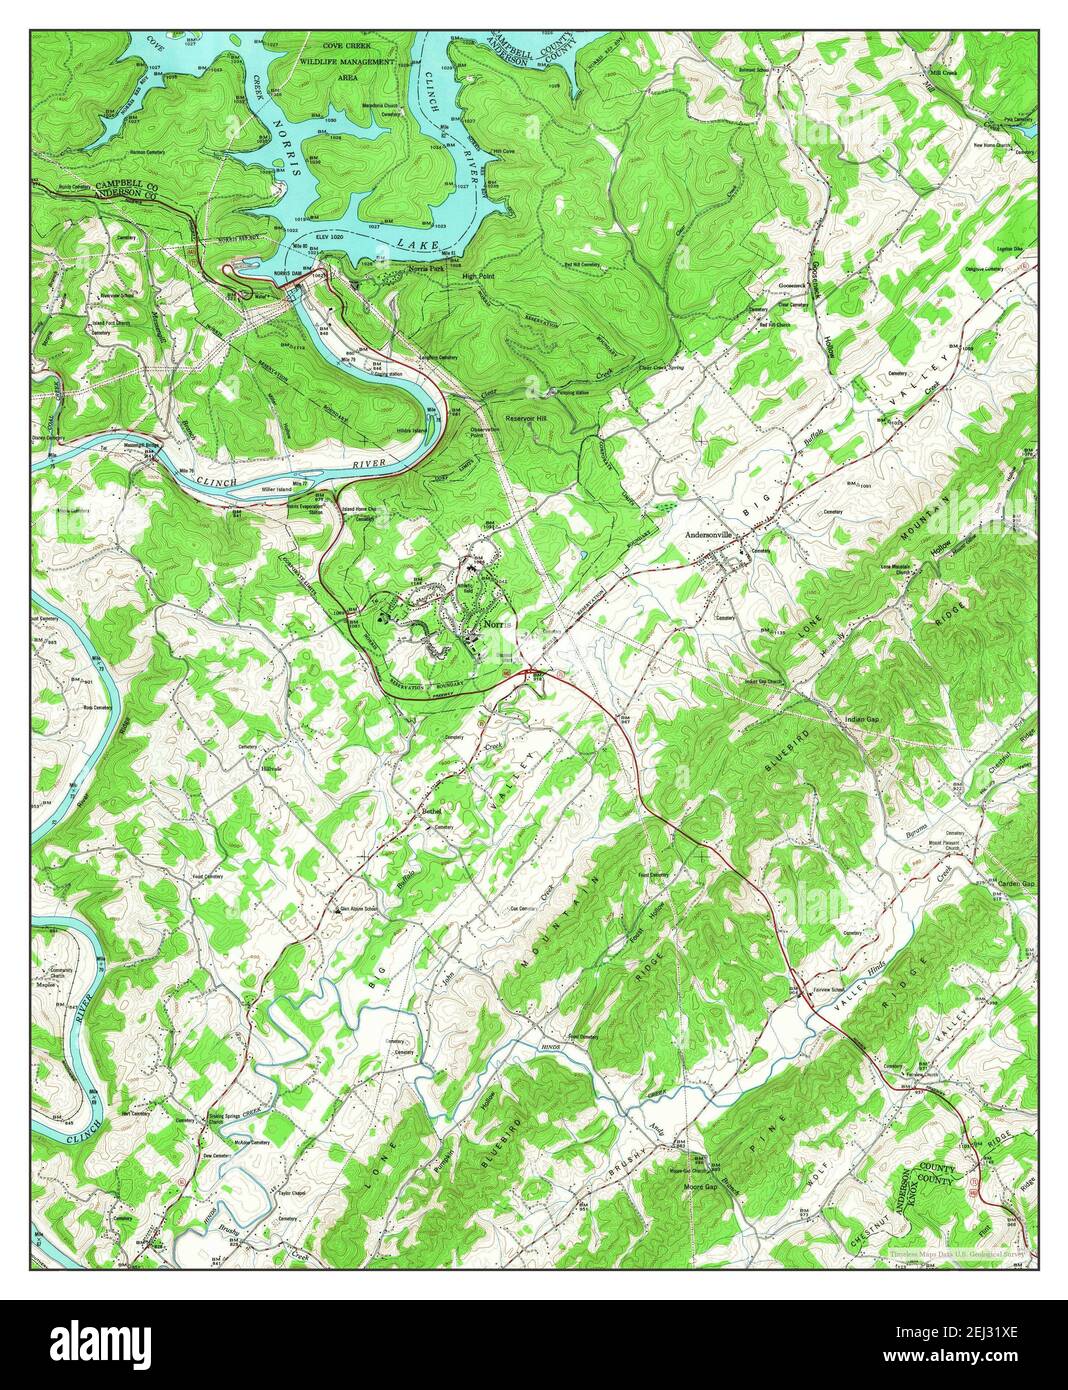 Norris, Tennessee, map 1952, 1:24000, United States of America by Timeless Maps, data U.S. Geological Survey Stock Photo